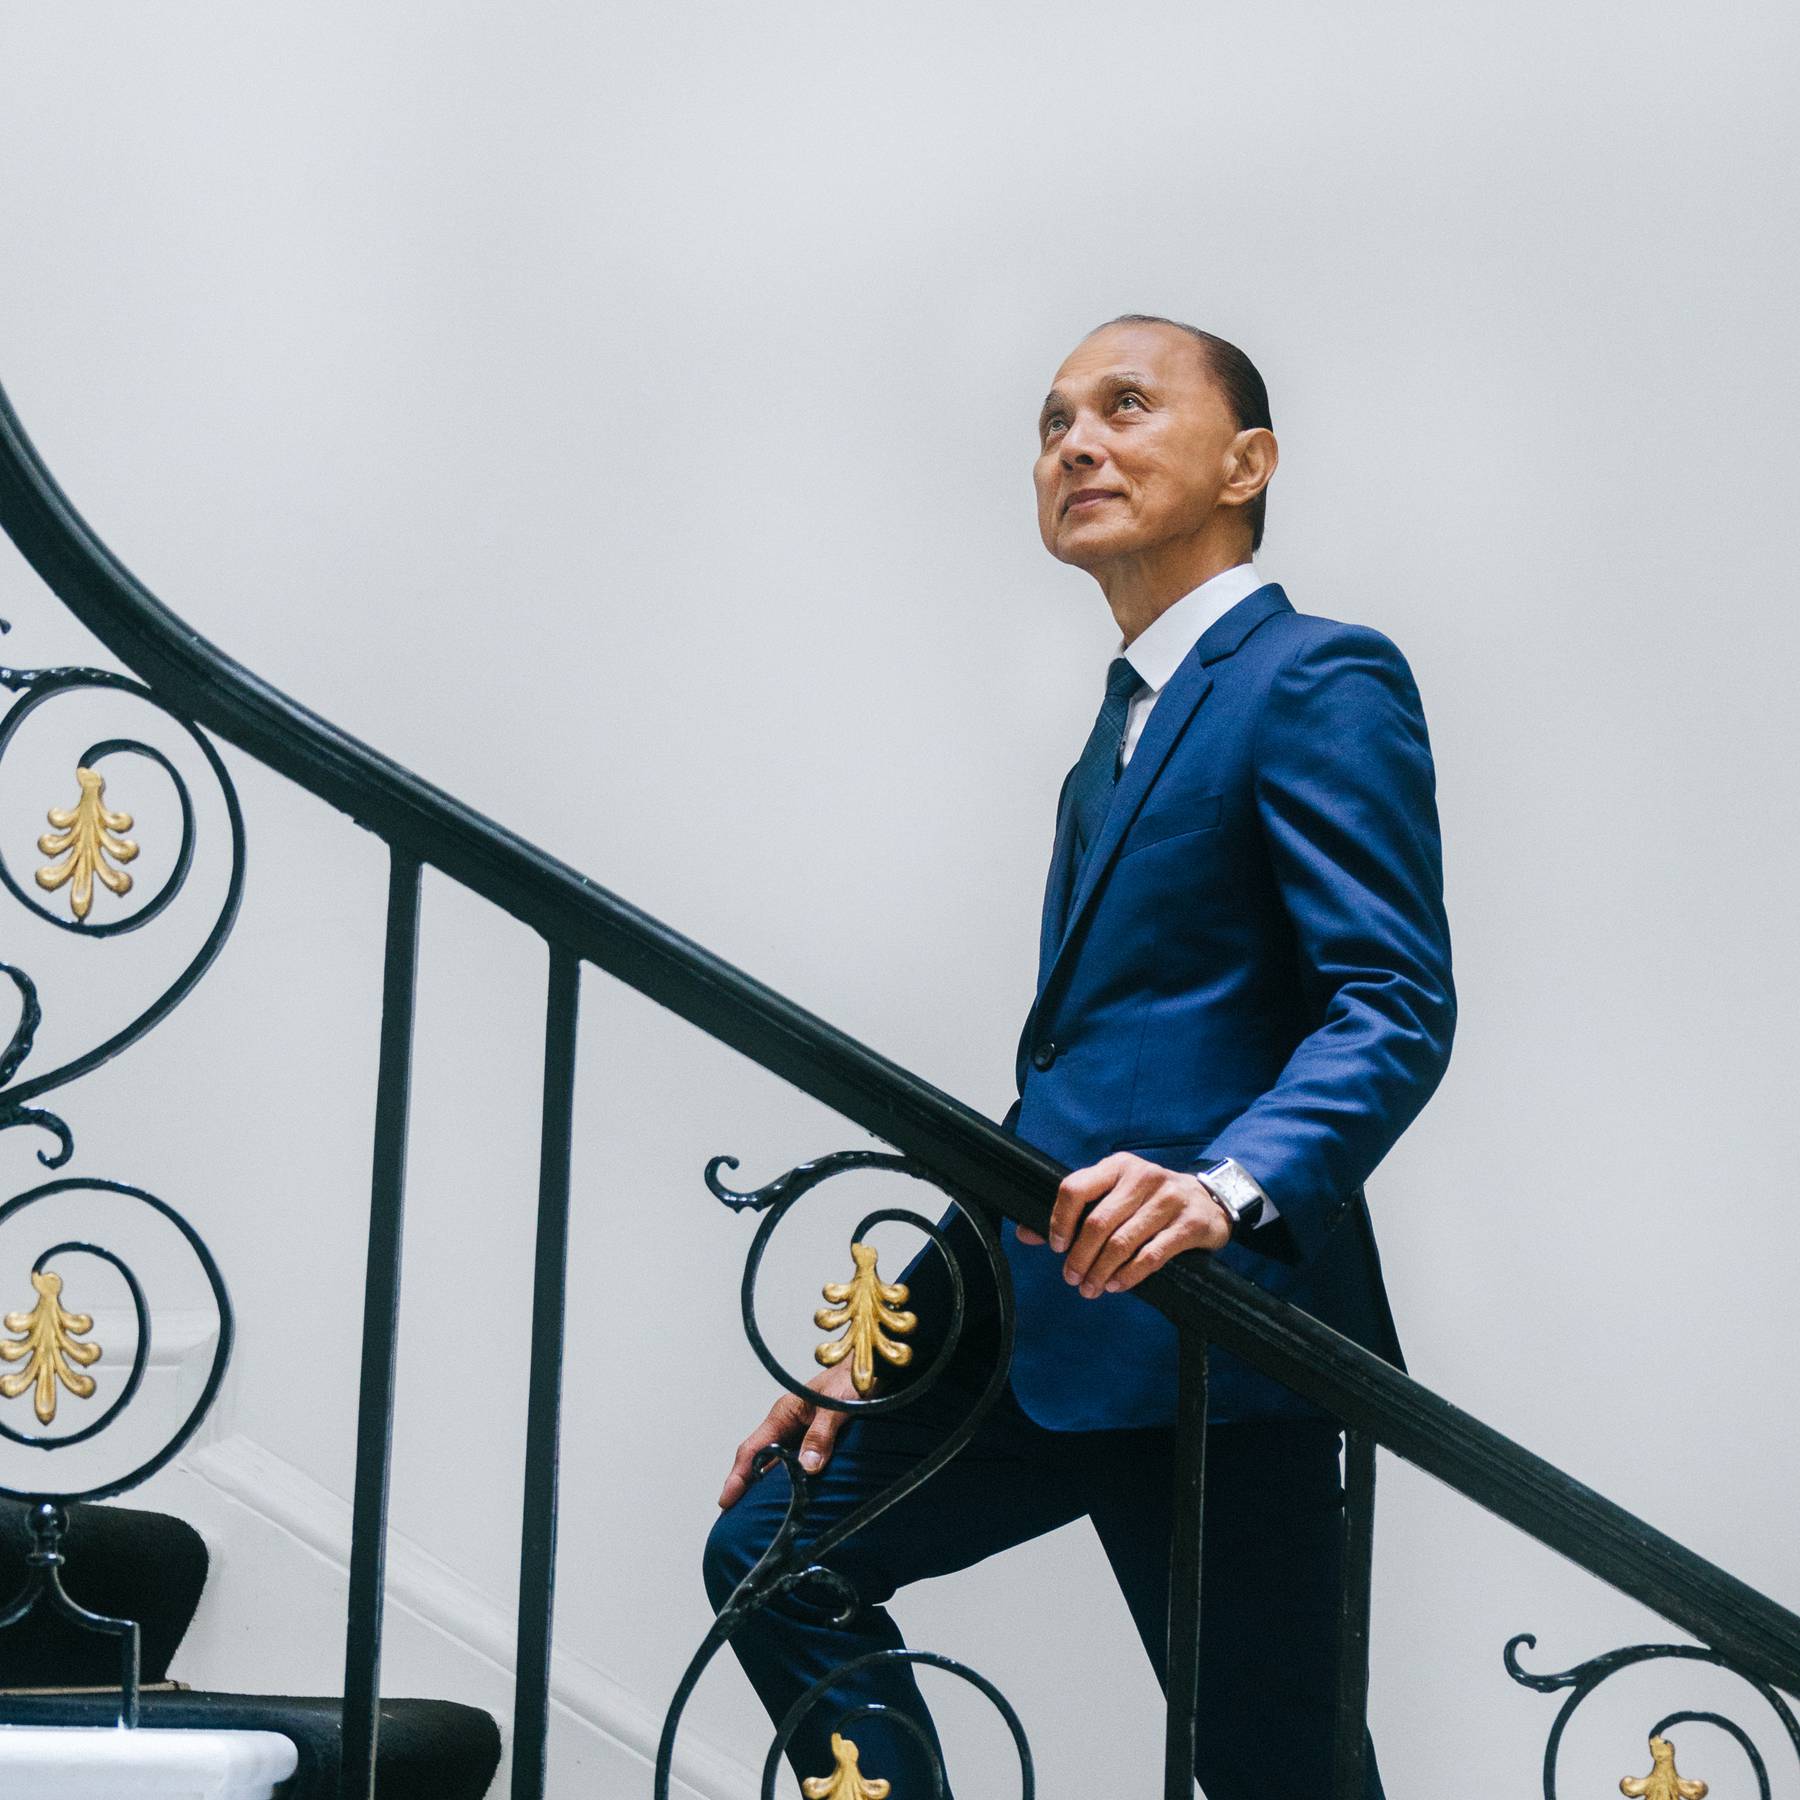 Jimmy Choo Prepares to Open His Very Own Fashion Academy